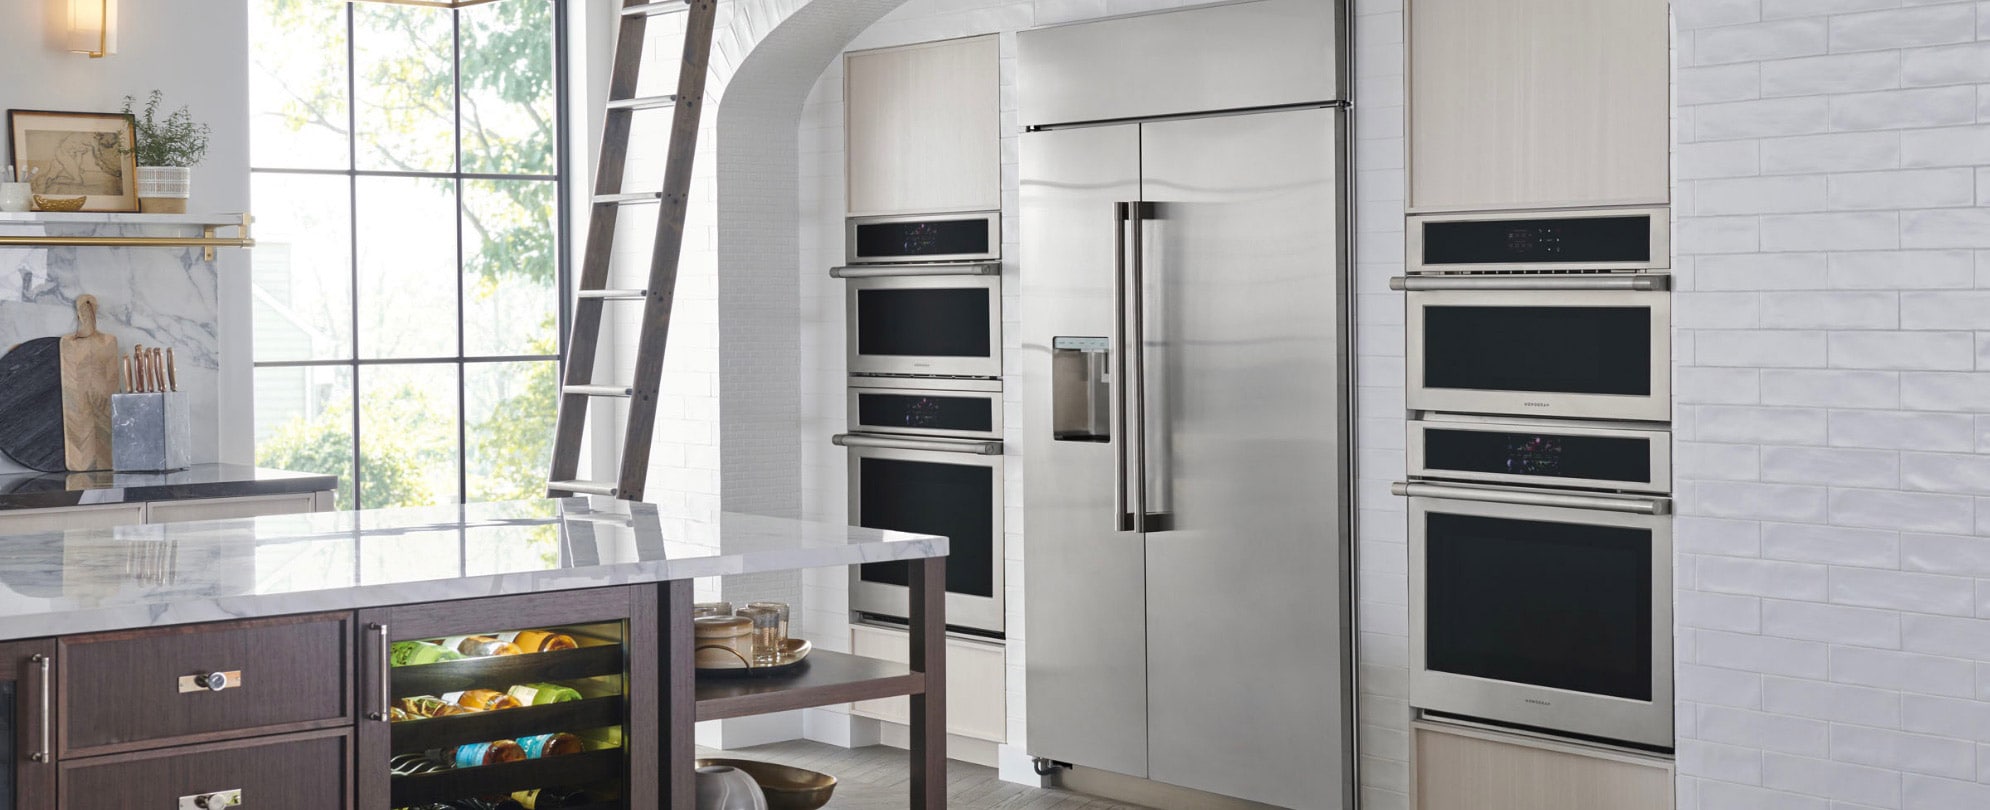 A contemporary kitchen showcasing a built-in refrigerator and four ovens from GE Appliances. 